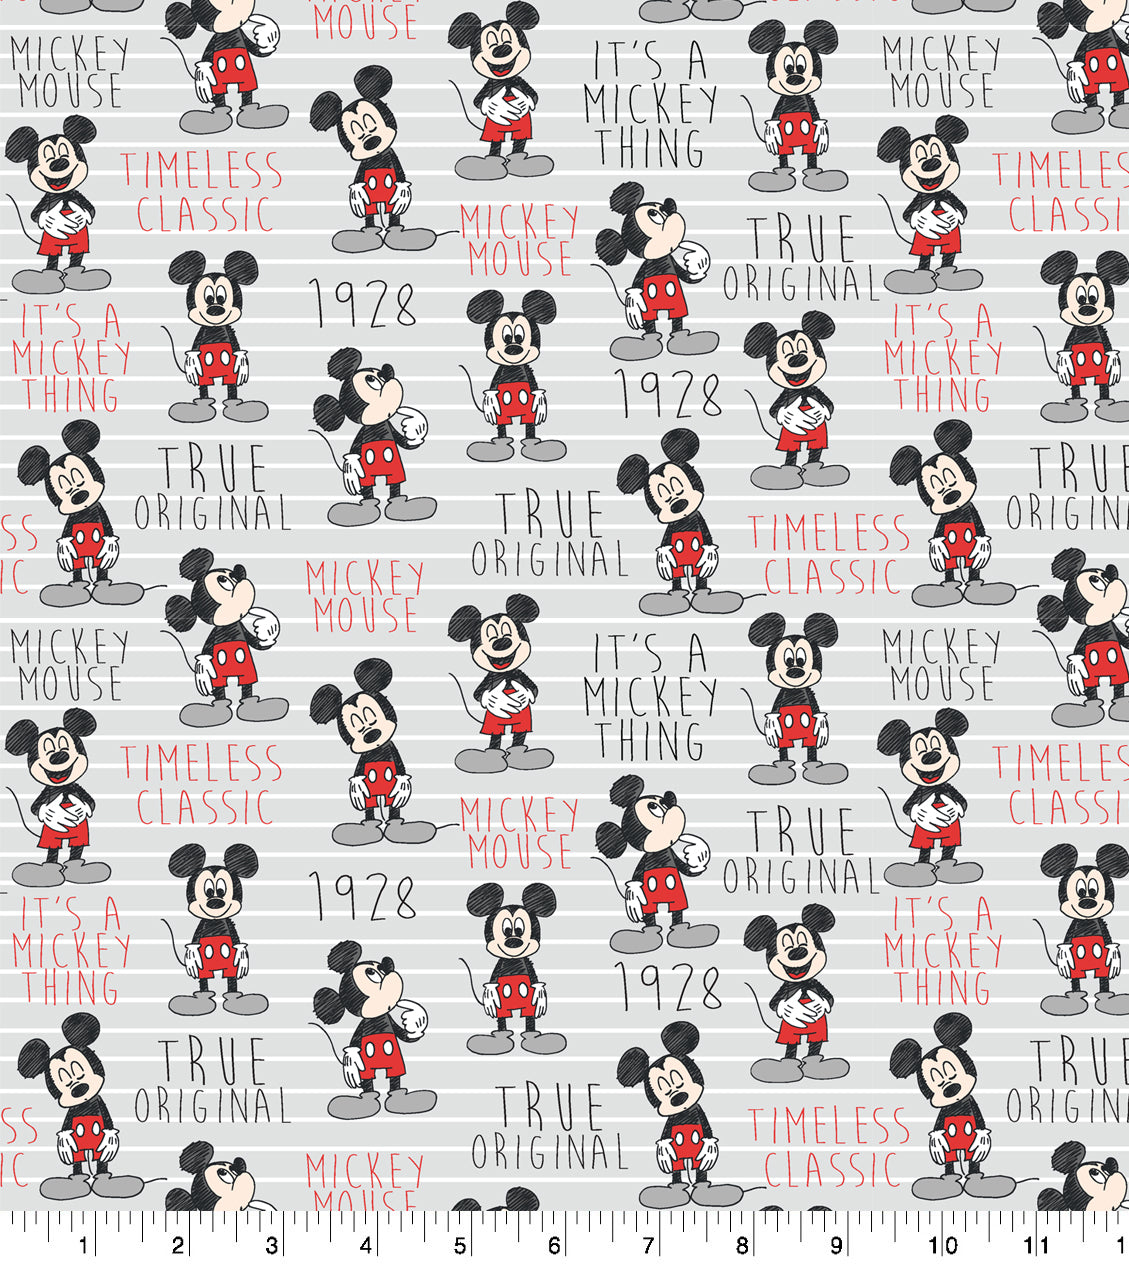 Disney Mickey Mouse Timeless Classic Cotton Fabric